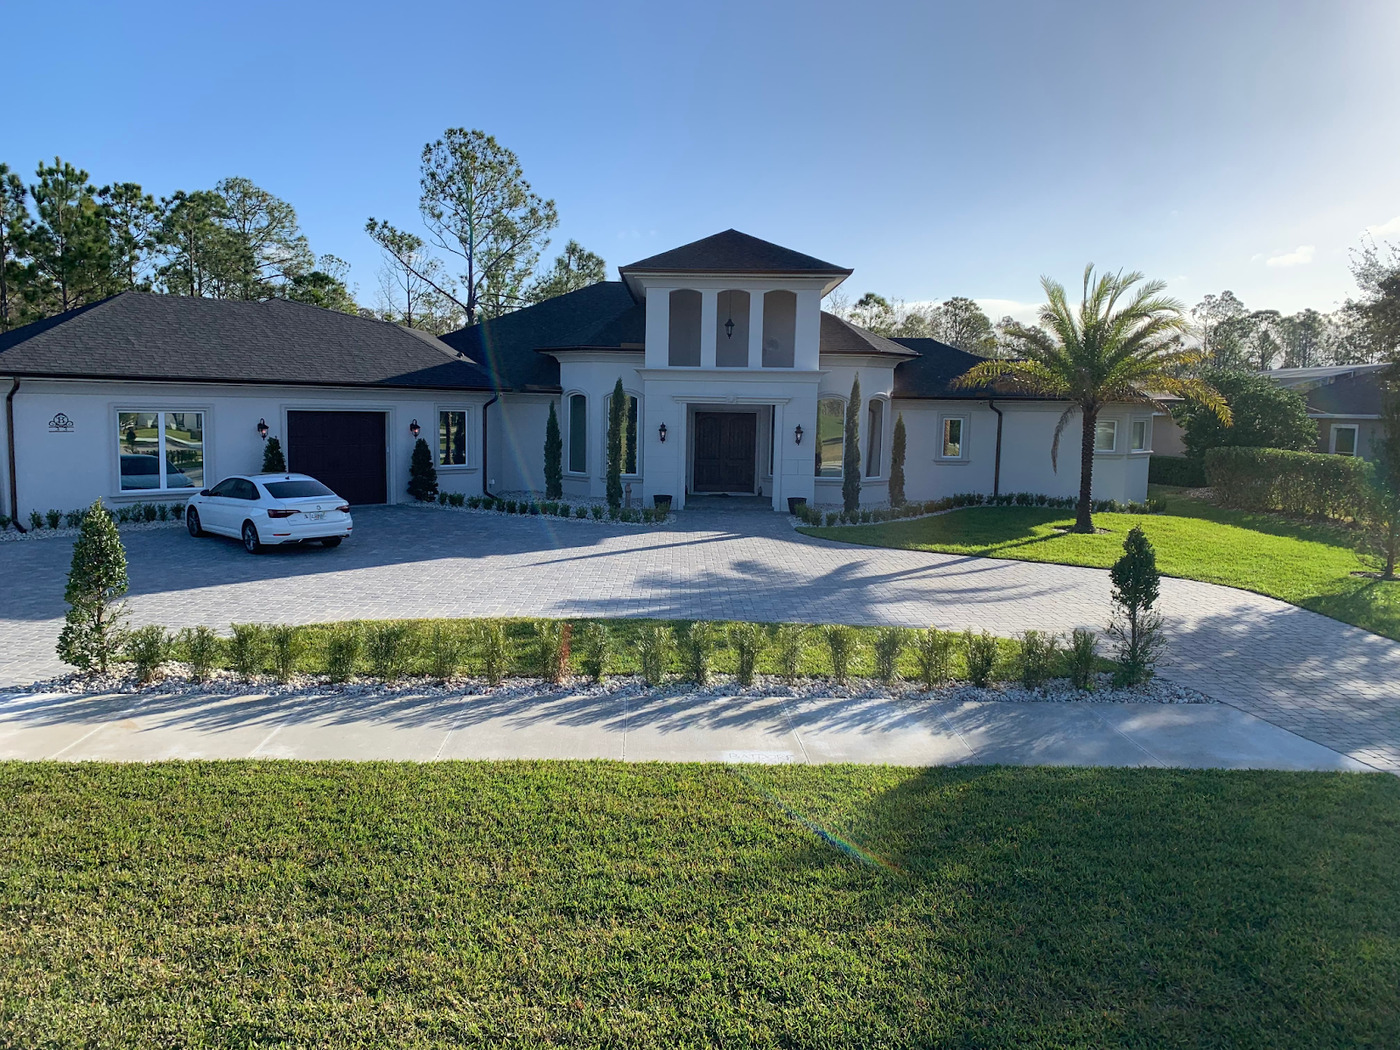 Located in the heart of Ormond Beach, Freedom Cuts Landscaping Service is owned by veteran Alex Santos, who found solace in landscaping.